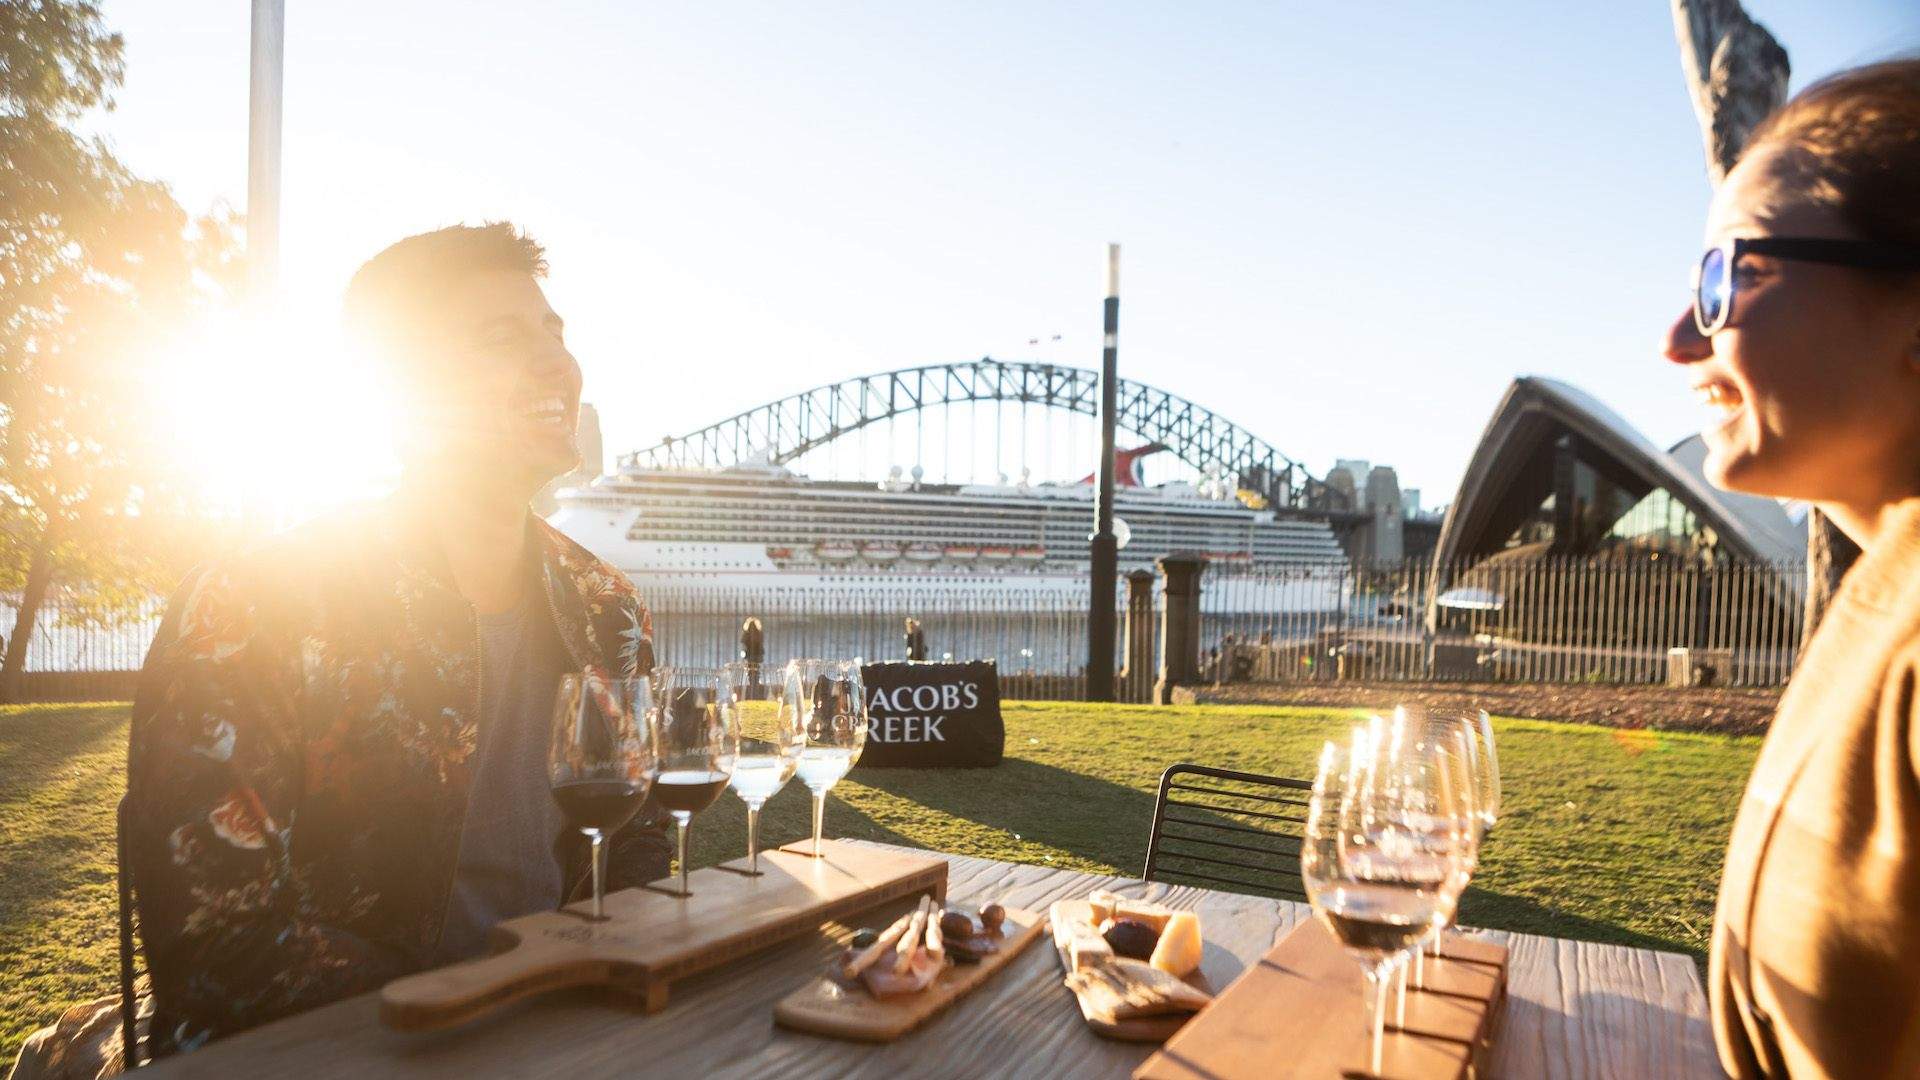 We're Giving Away A Night of Wine and Cheese at This Harbourside Pop-up Bar